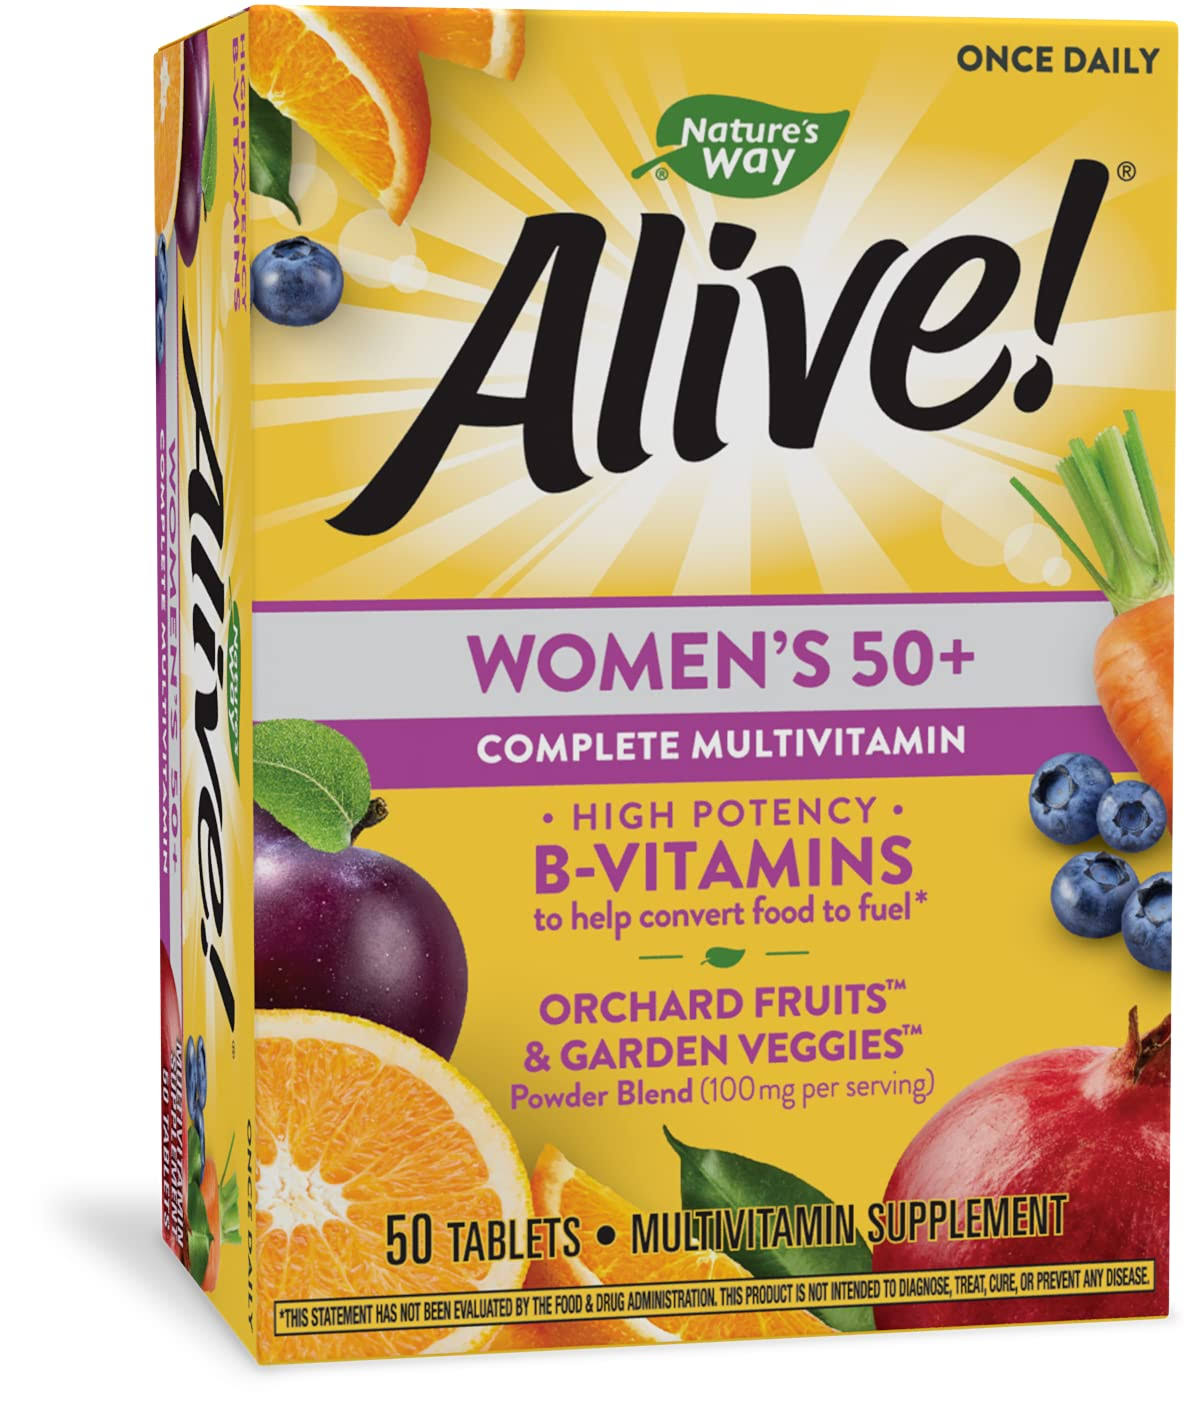 Nature's Way Alive! Complete Multivitamin, Women's 50+, Tablets - 50 tablets